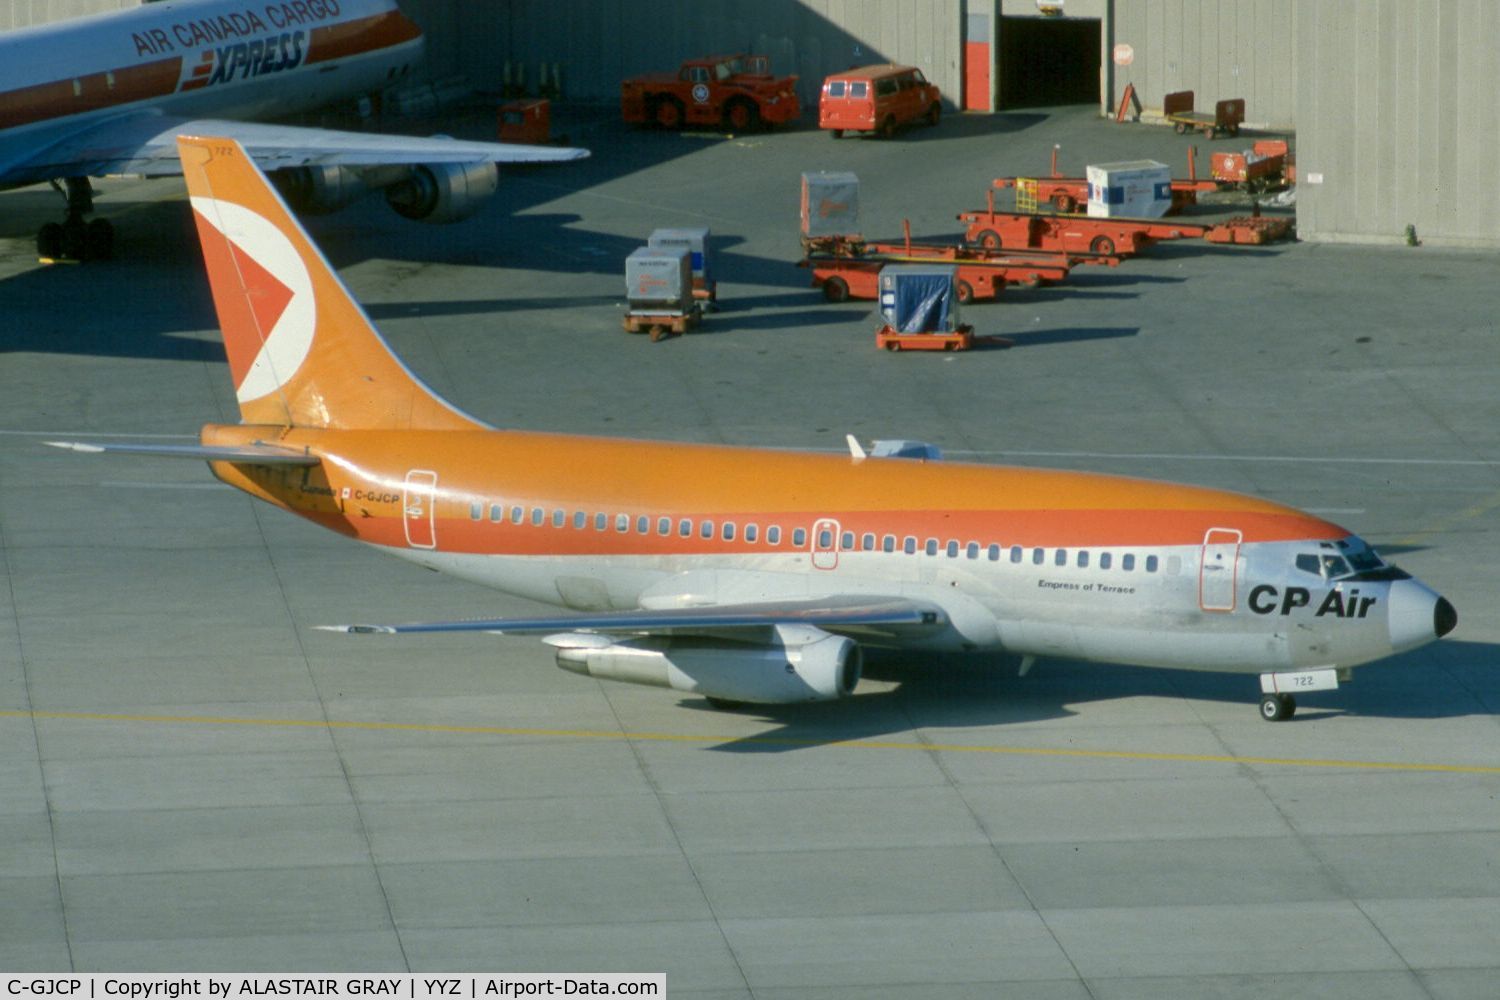 C-GJCP, 1982 Boeing 737-217 C/N 22728, I still think this livery was way ahead of its time. Taken from the top floor of the terminal 2 parking lot at Pearson.